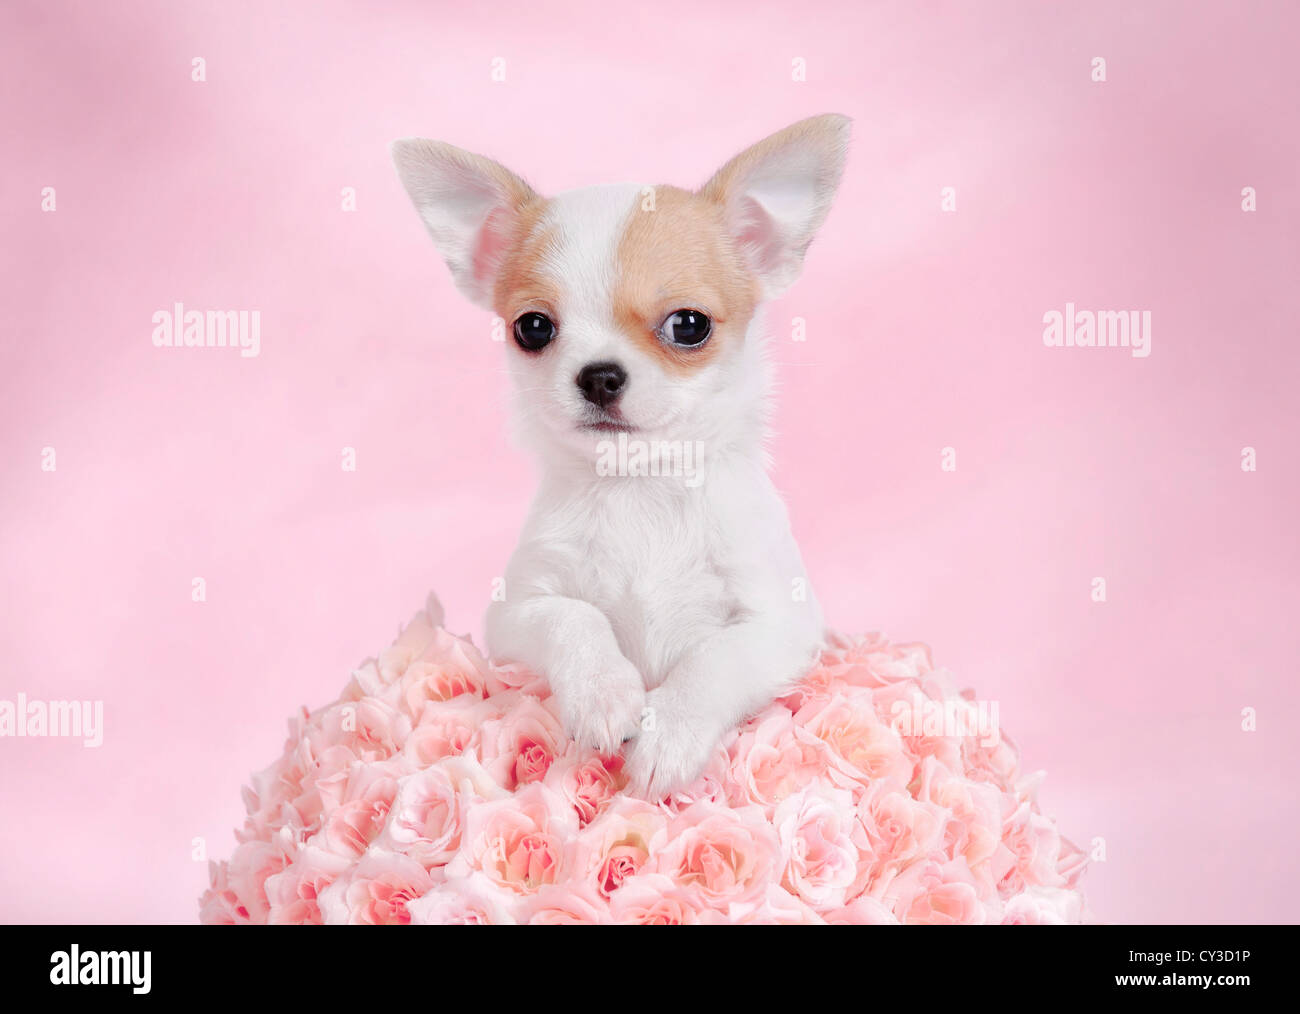 Chihuahua puppy portrait with pink roses Stock Photo